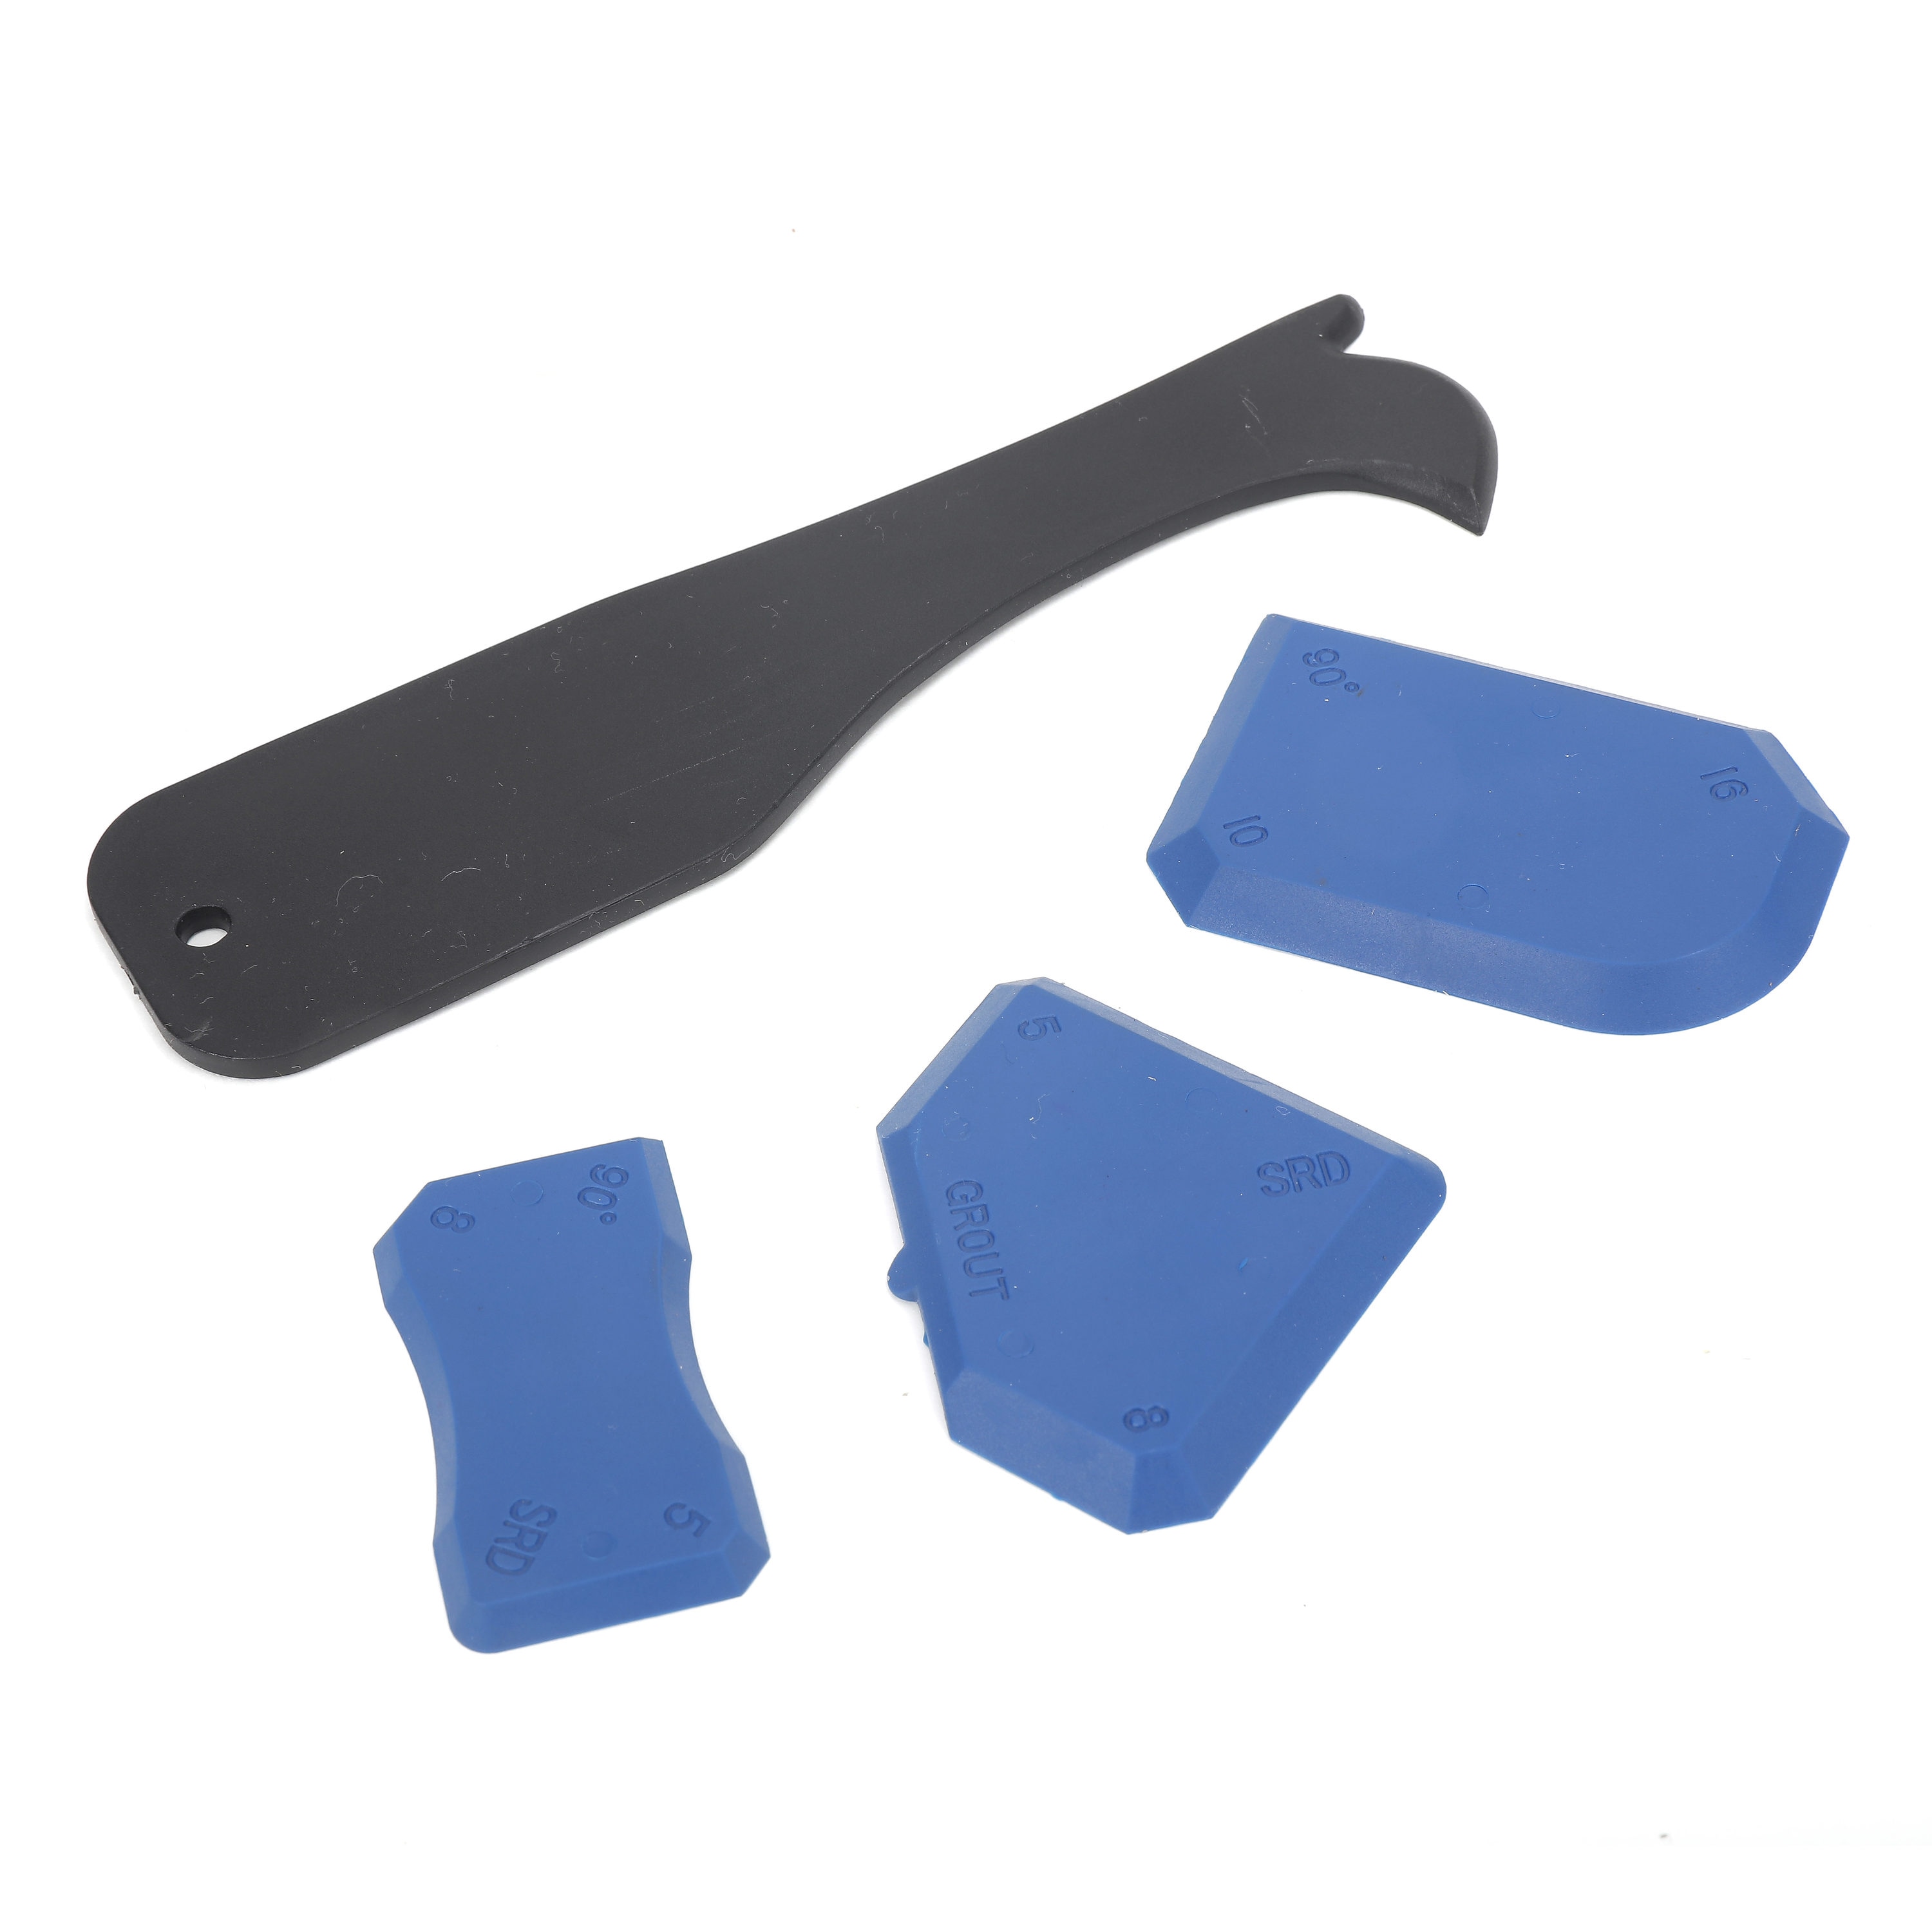 4 Caulking Tool Kit Sealant Silicone Grout Removal Finishing & Cleaning Set Blue 